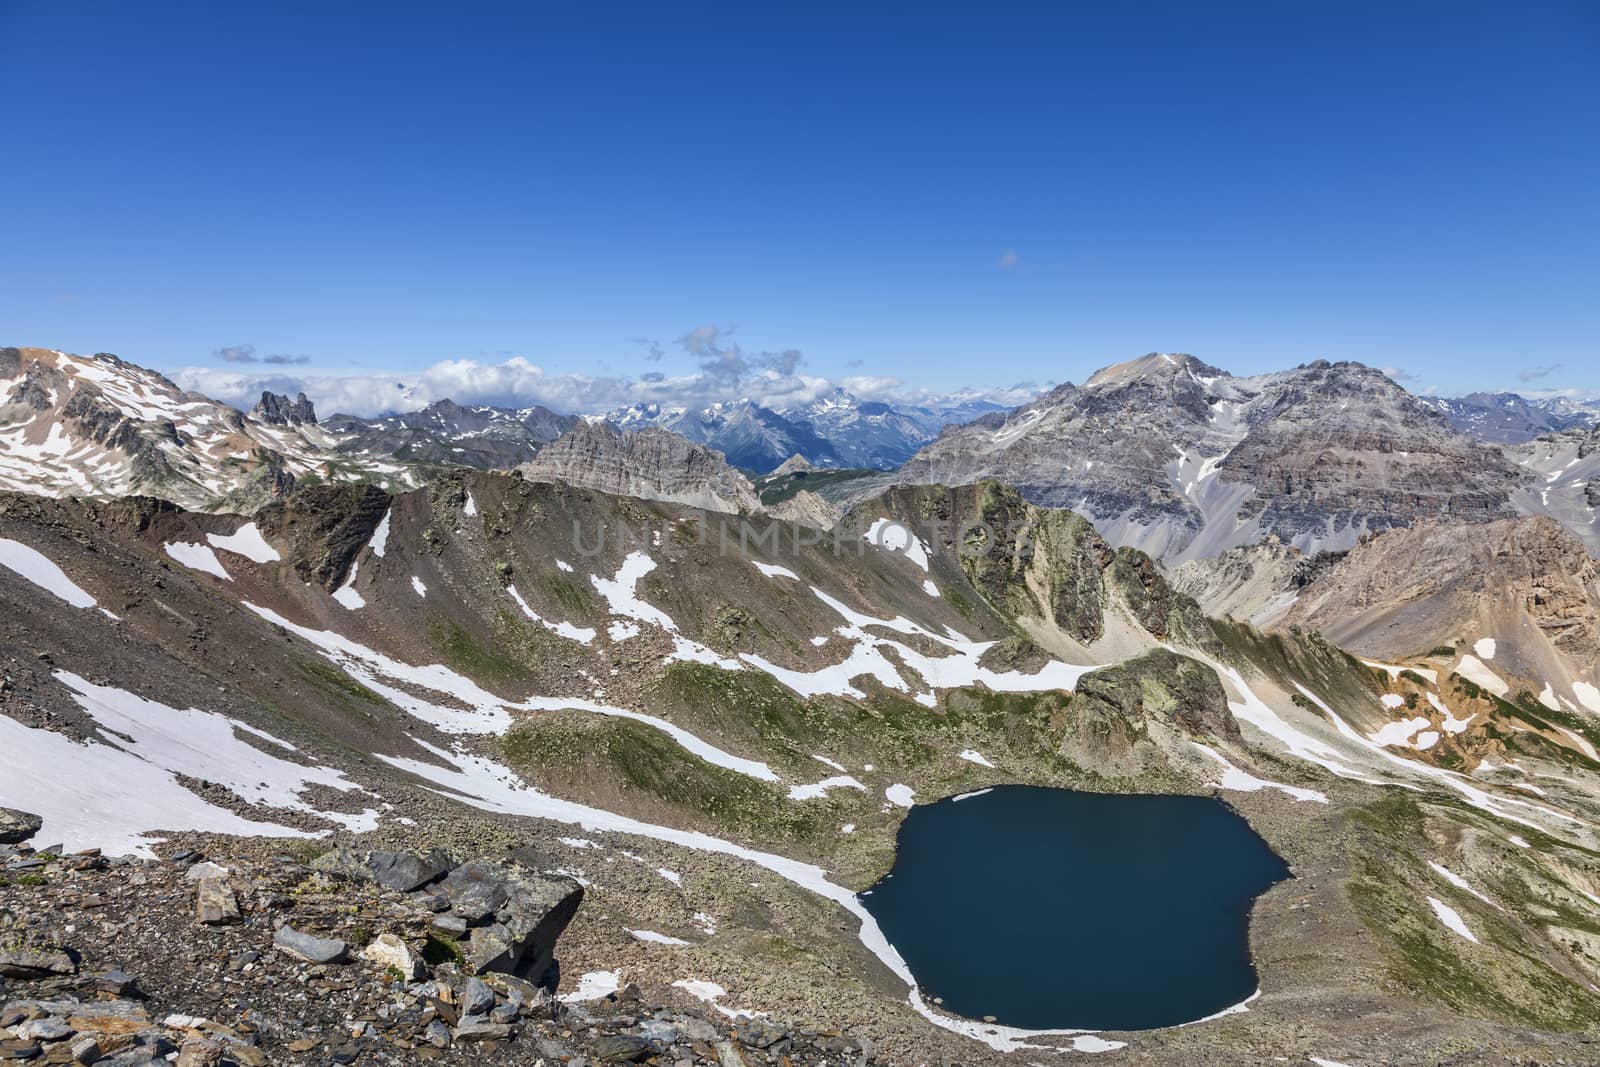 Lac Blanc from Vallee de la Claree, France by RazvanPhotography